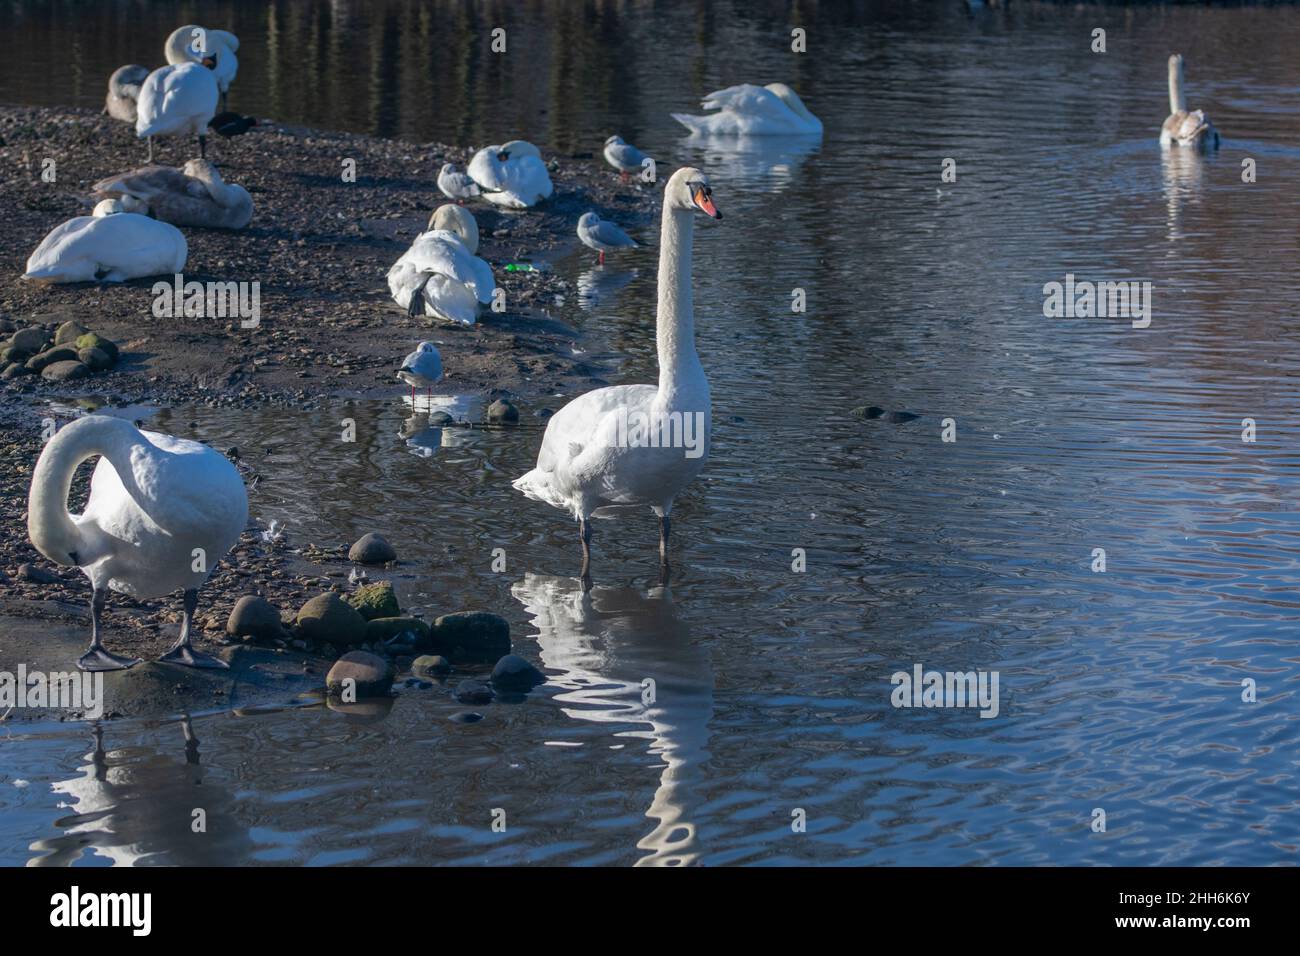 Group of mute swans at a lake Stock Photo